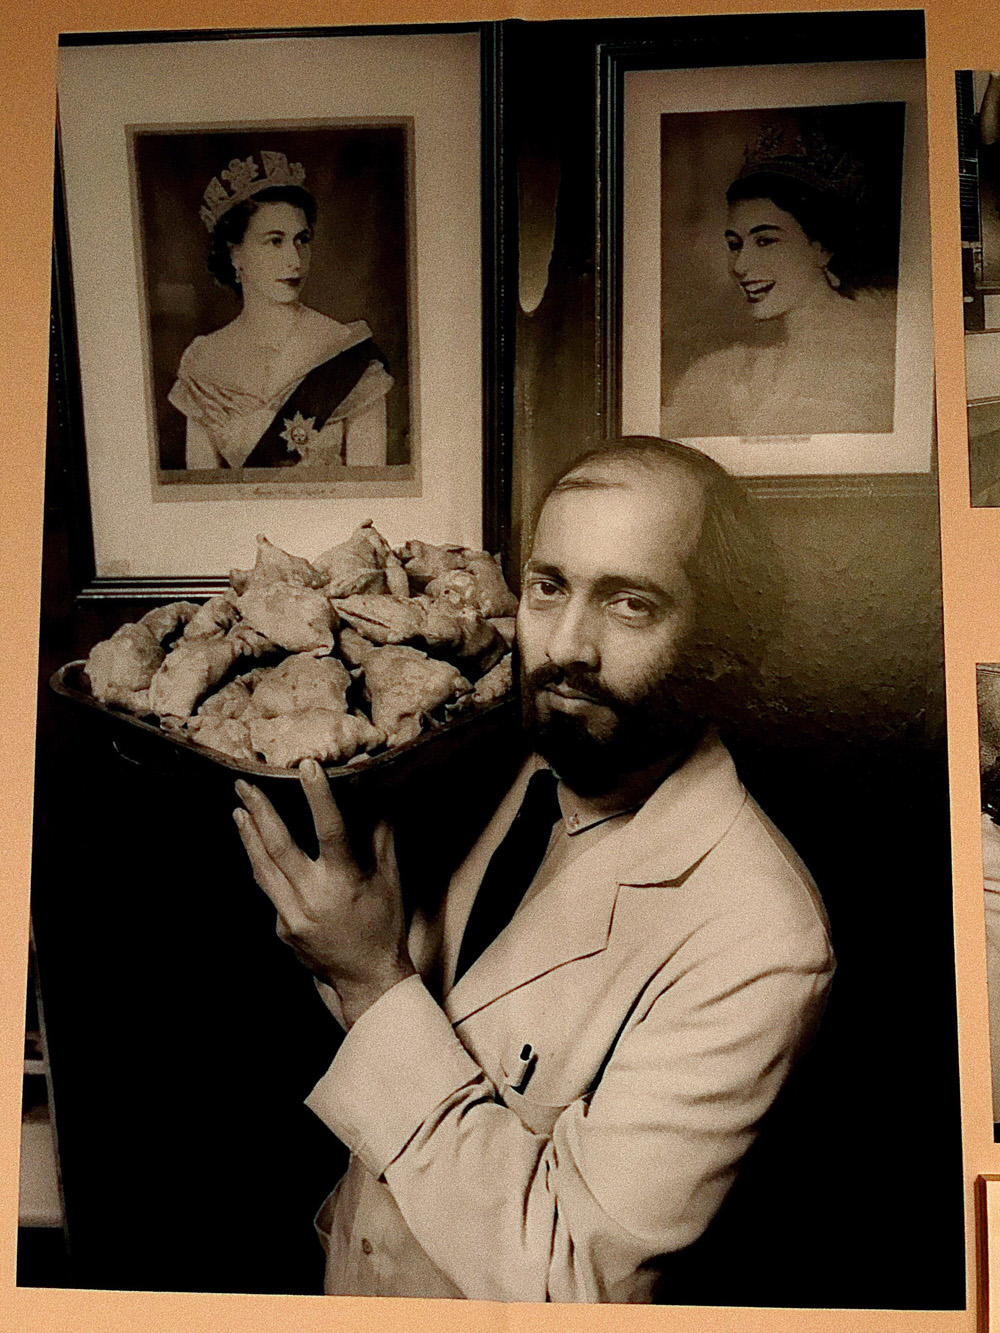 Black-and-white photograph of a man holding a plate of samosas with a portrait of the Queen in the background